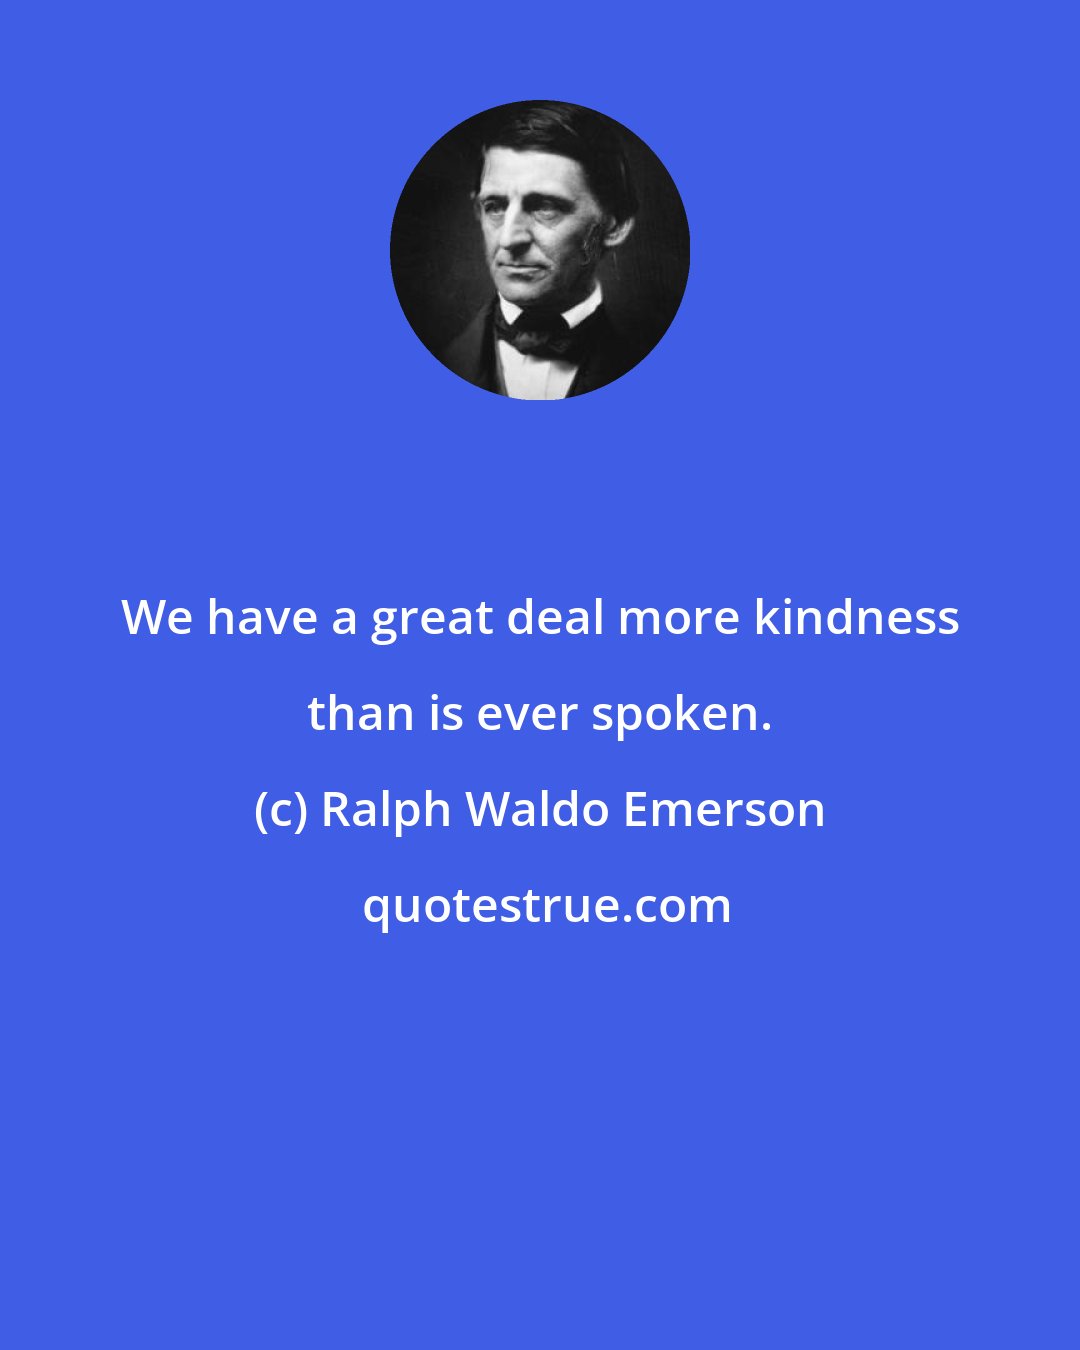 Ralph Waldo Emerson: We have a great deal more kindness than is ever spoken.